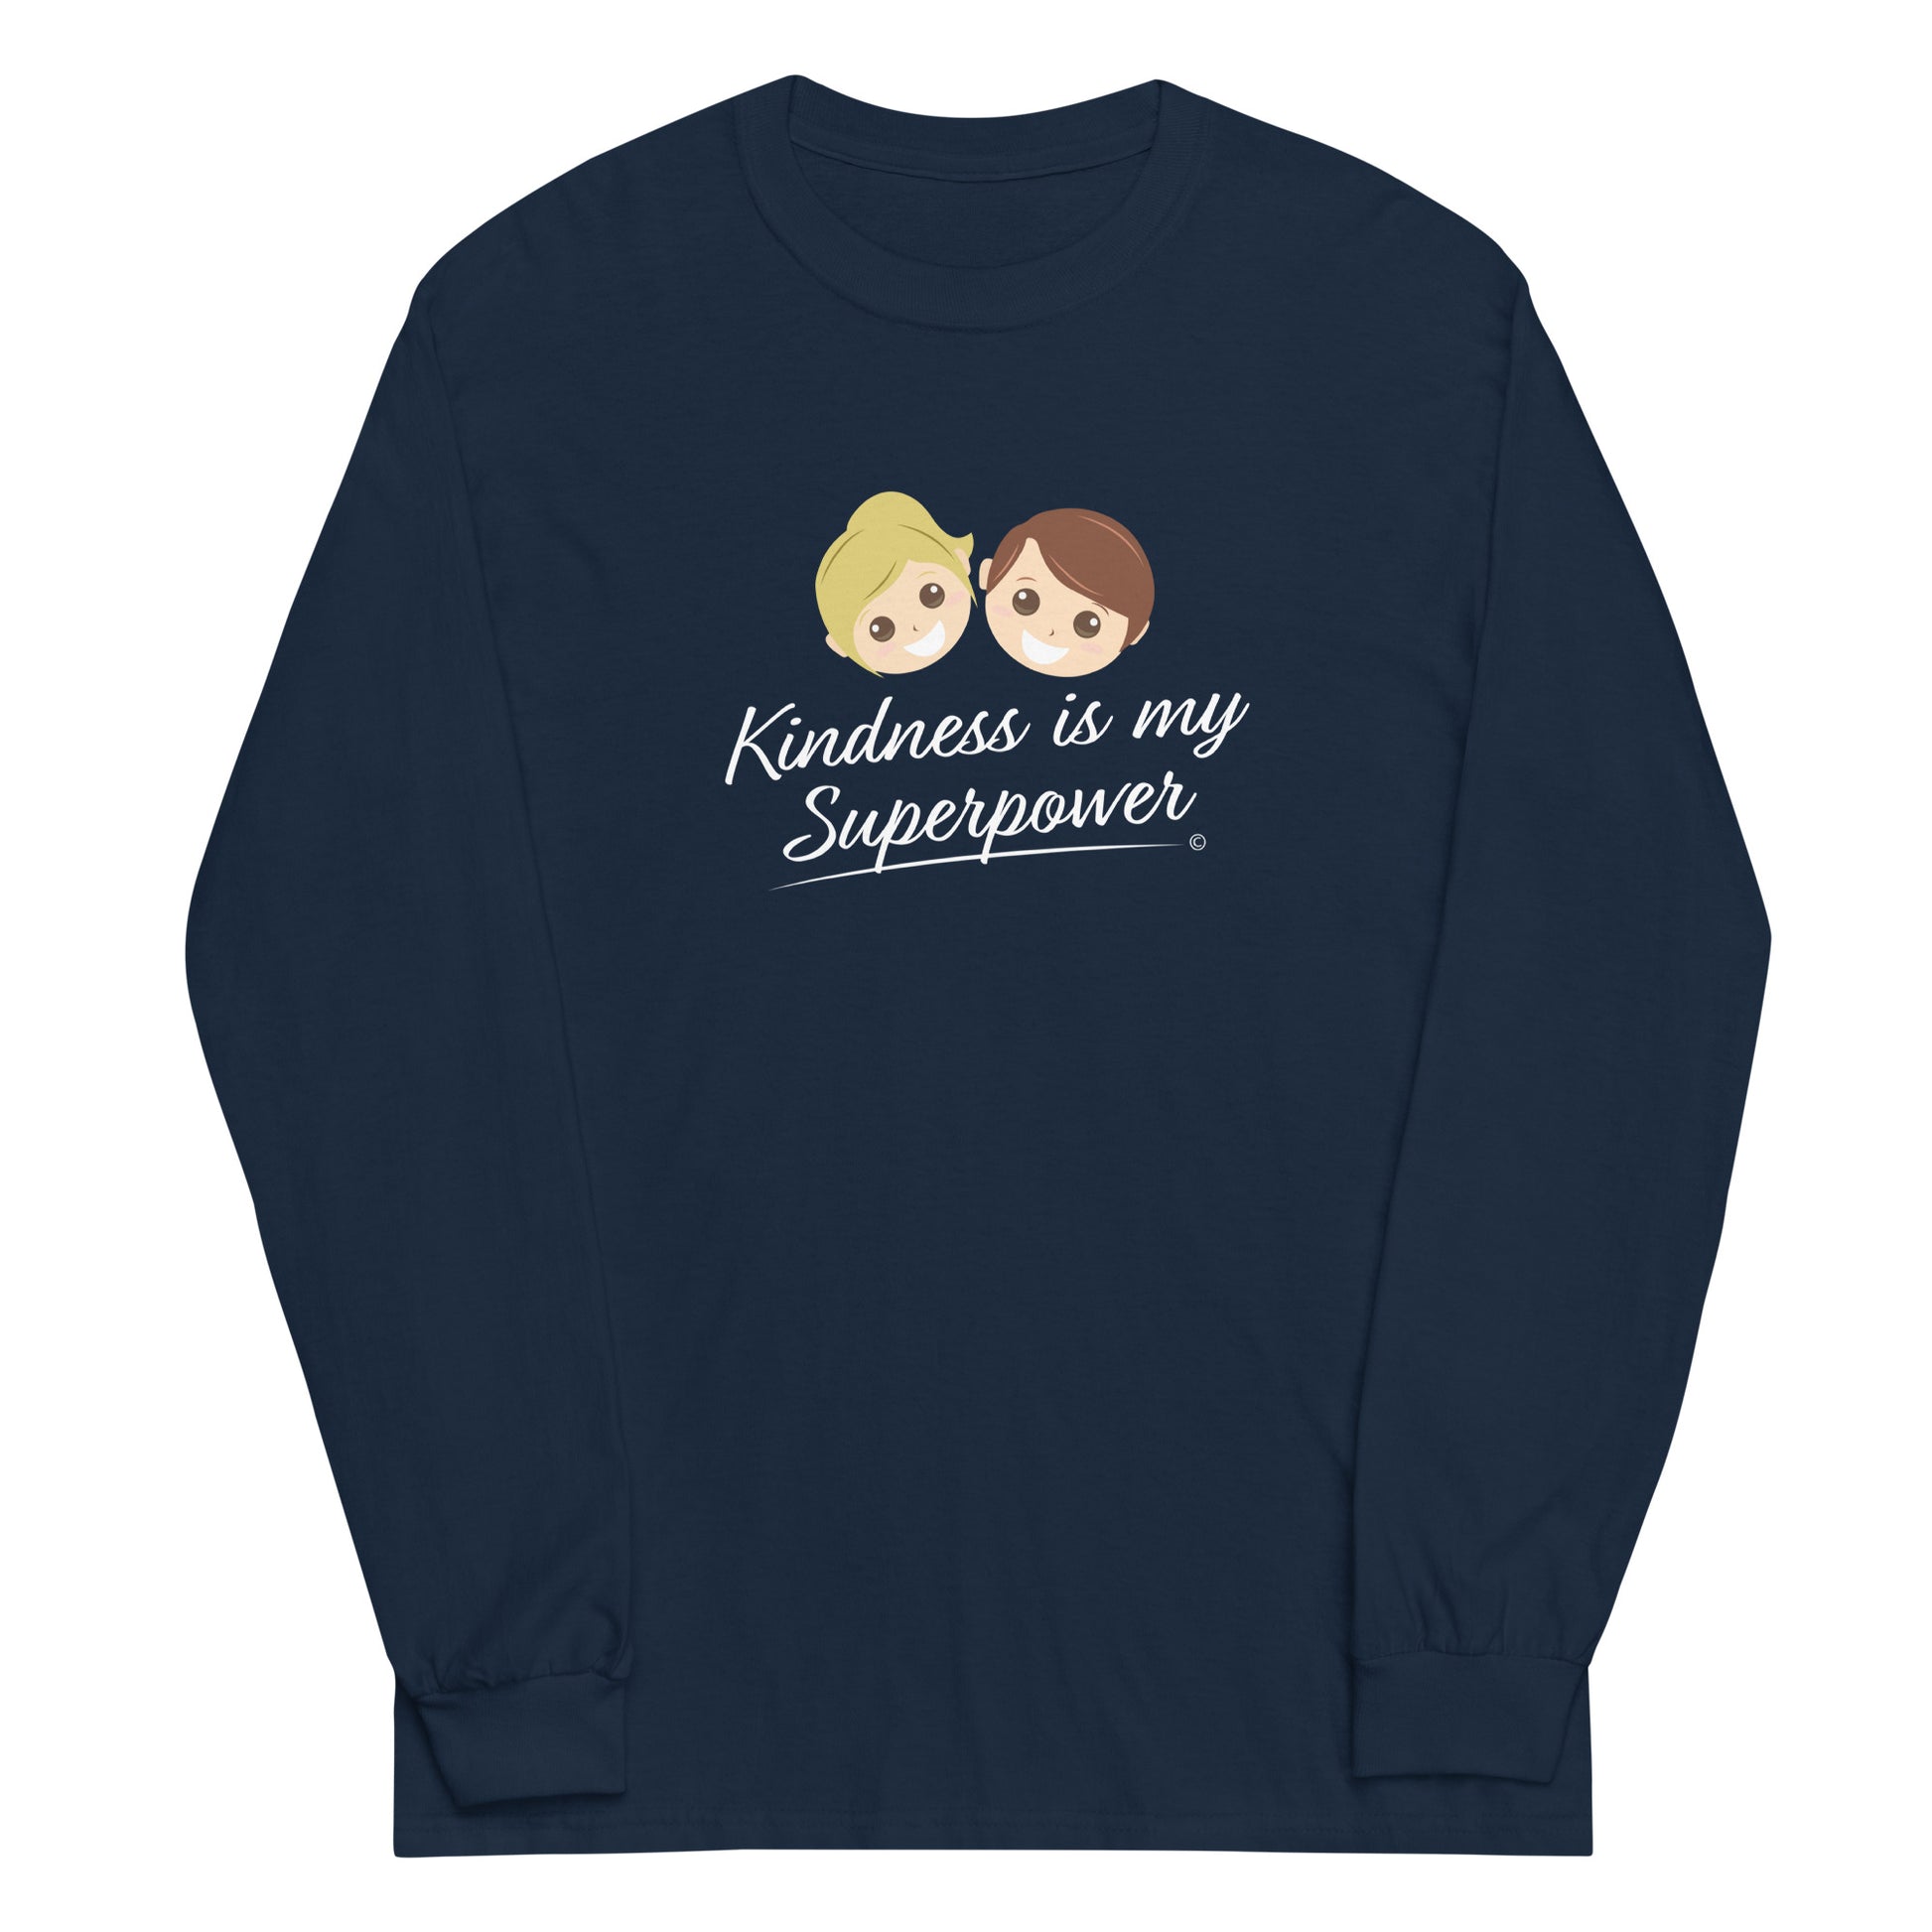 A stylish long sleeve shirt in navy featuring the empowering quote 'Kindness is my Superpower' in bold lettering.